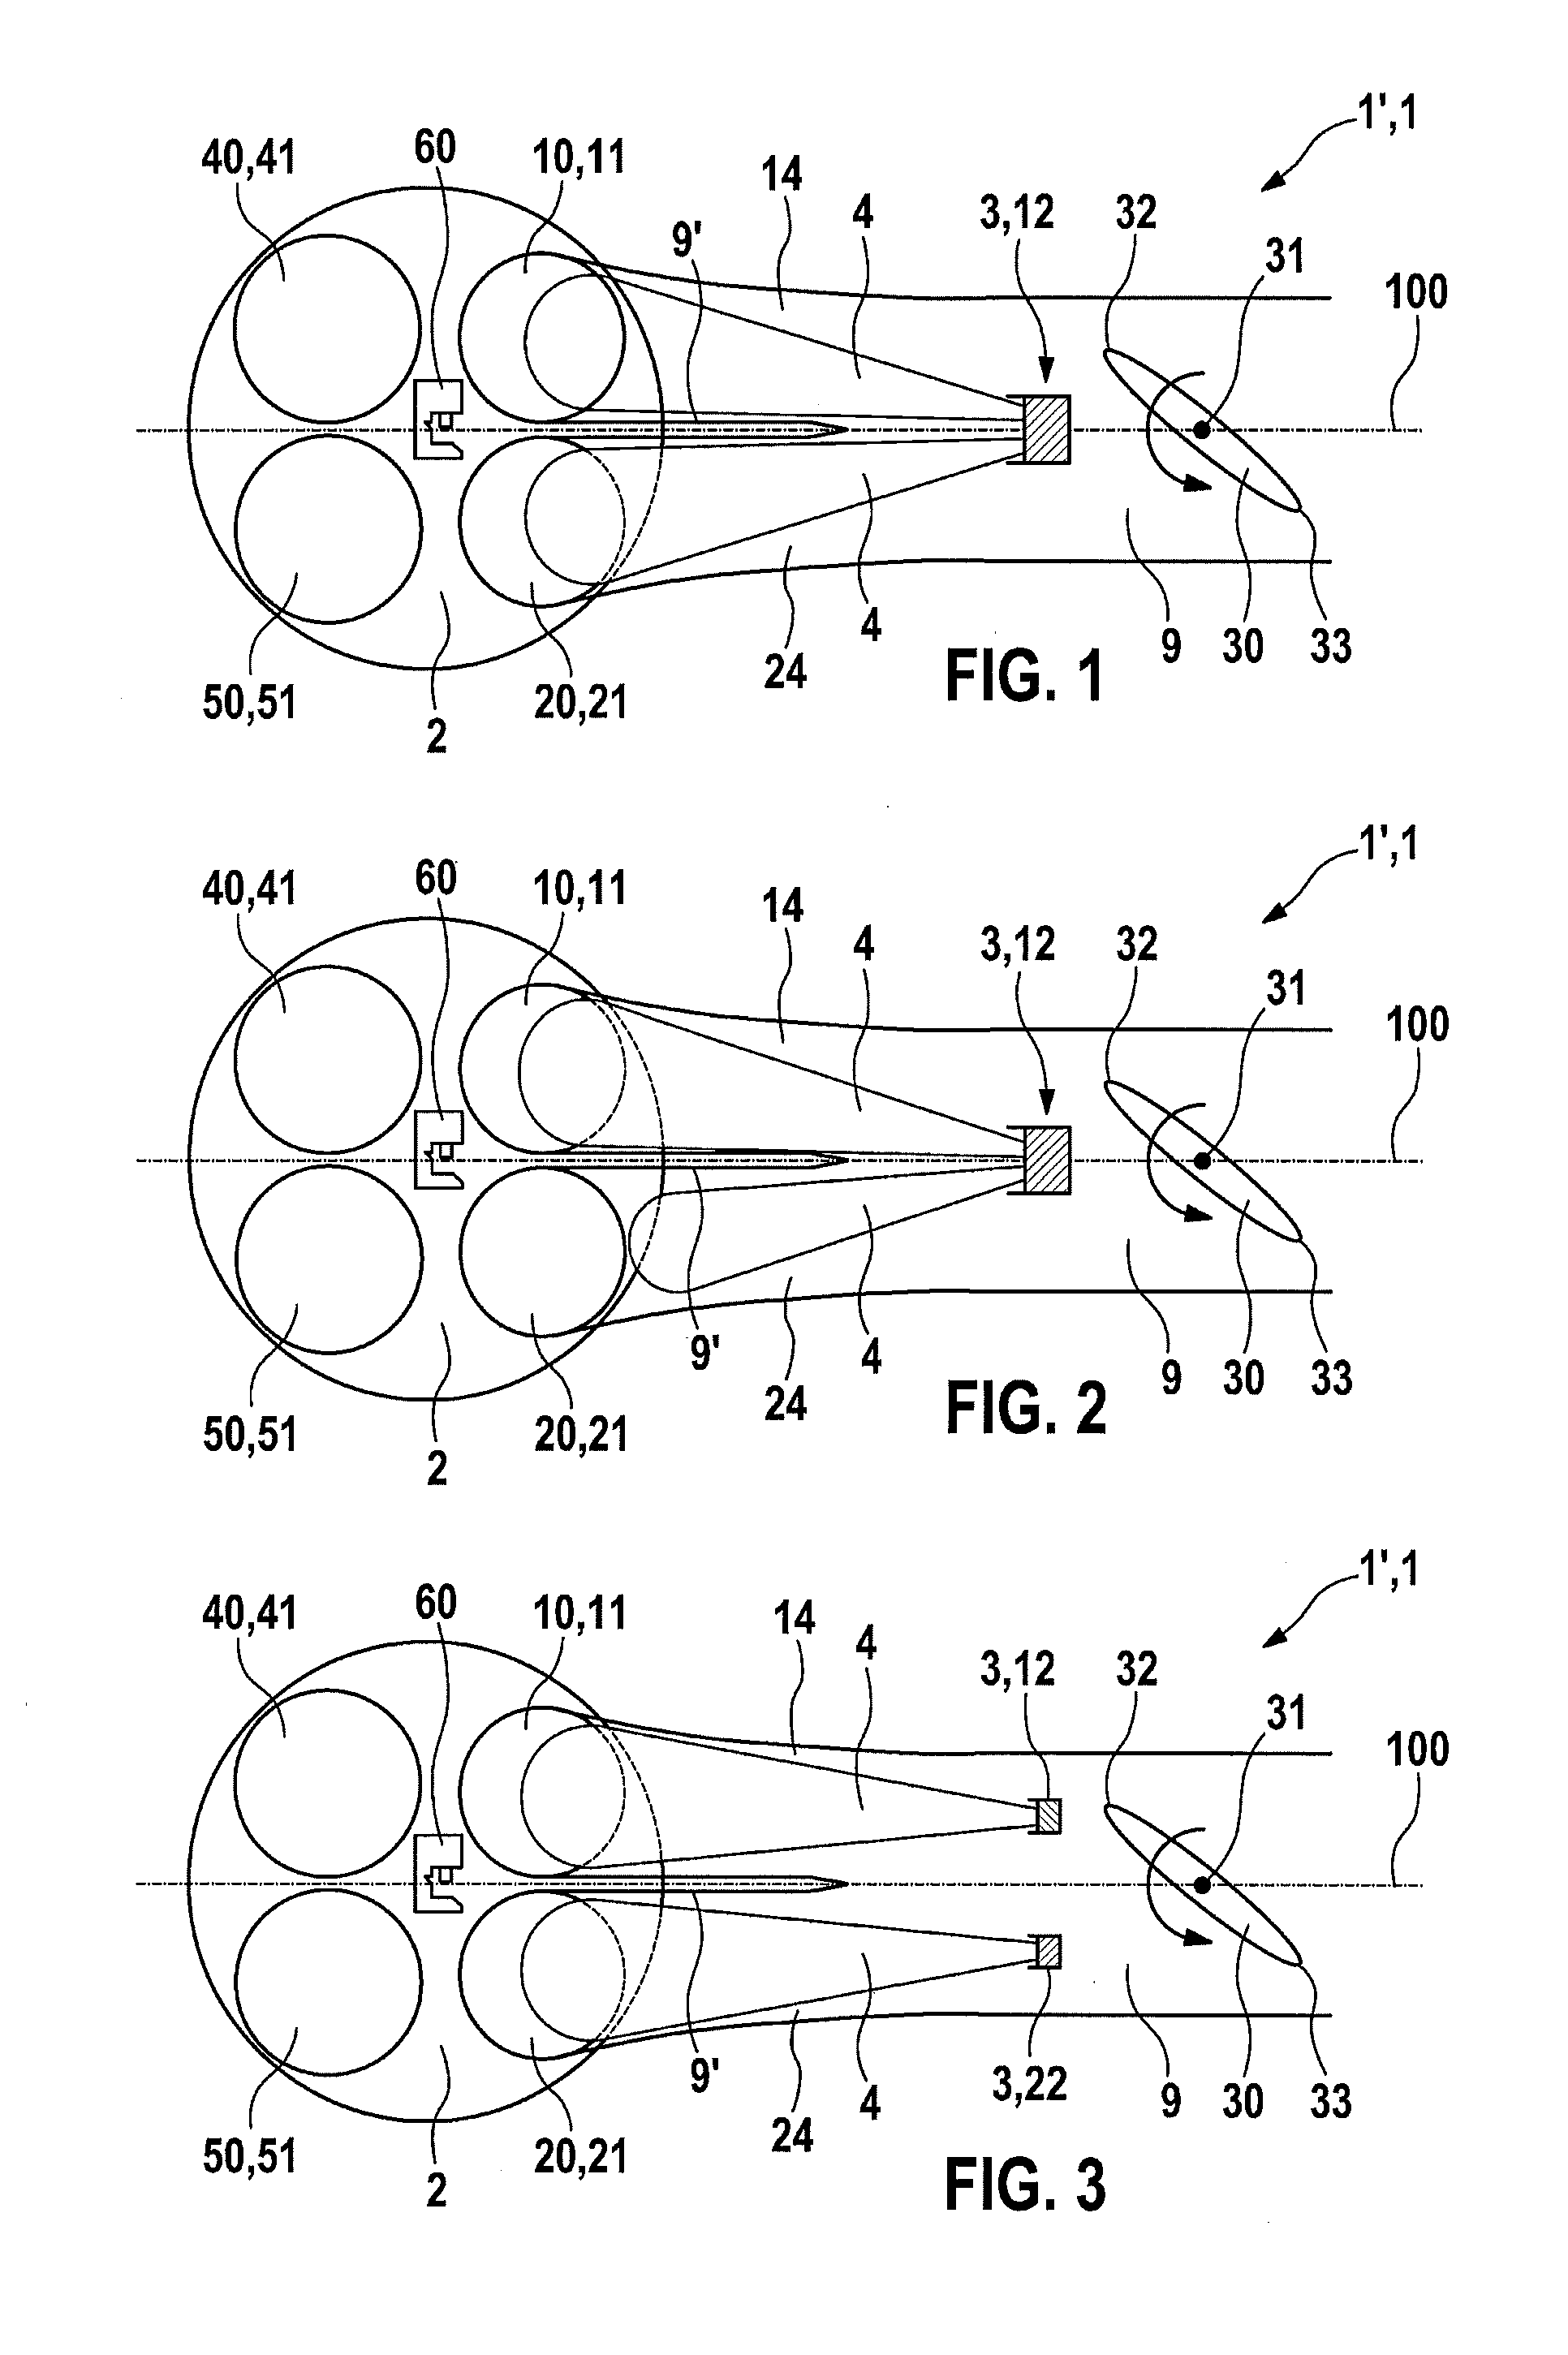 Intake and injection device, system, and internal combustion engine